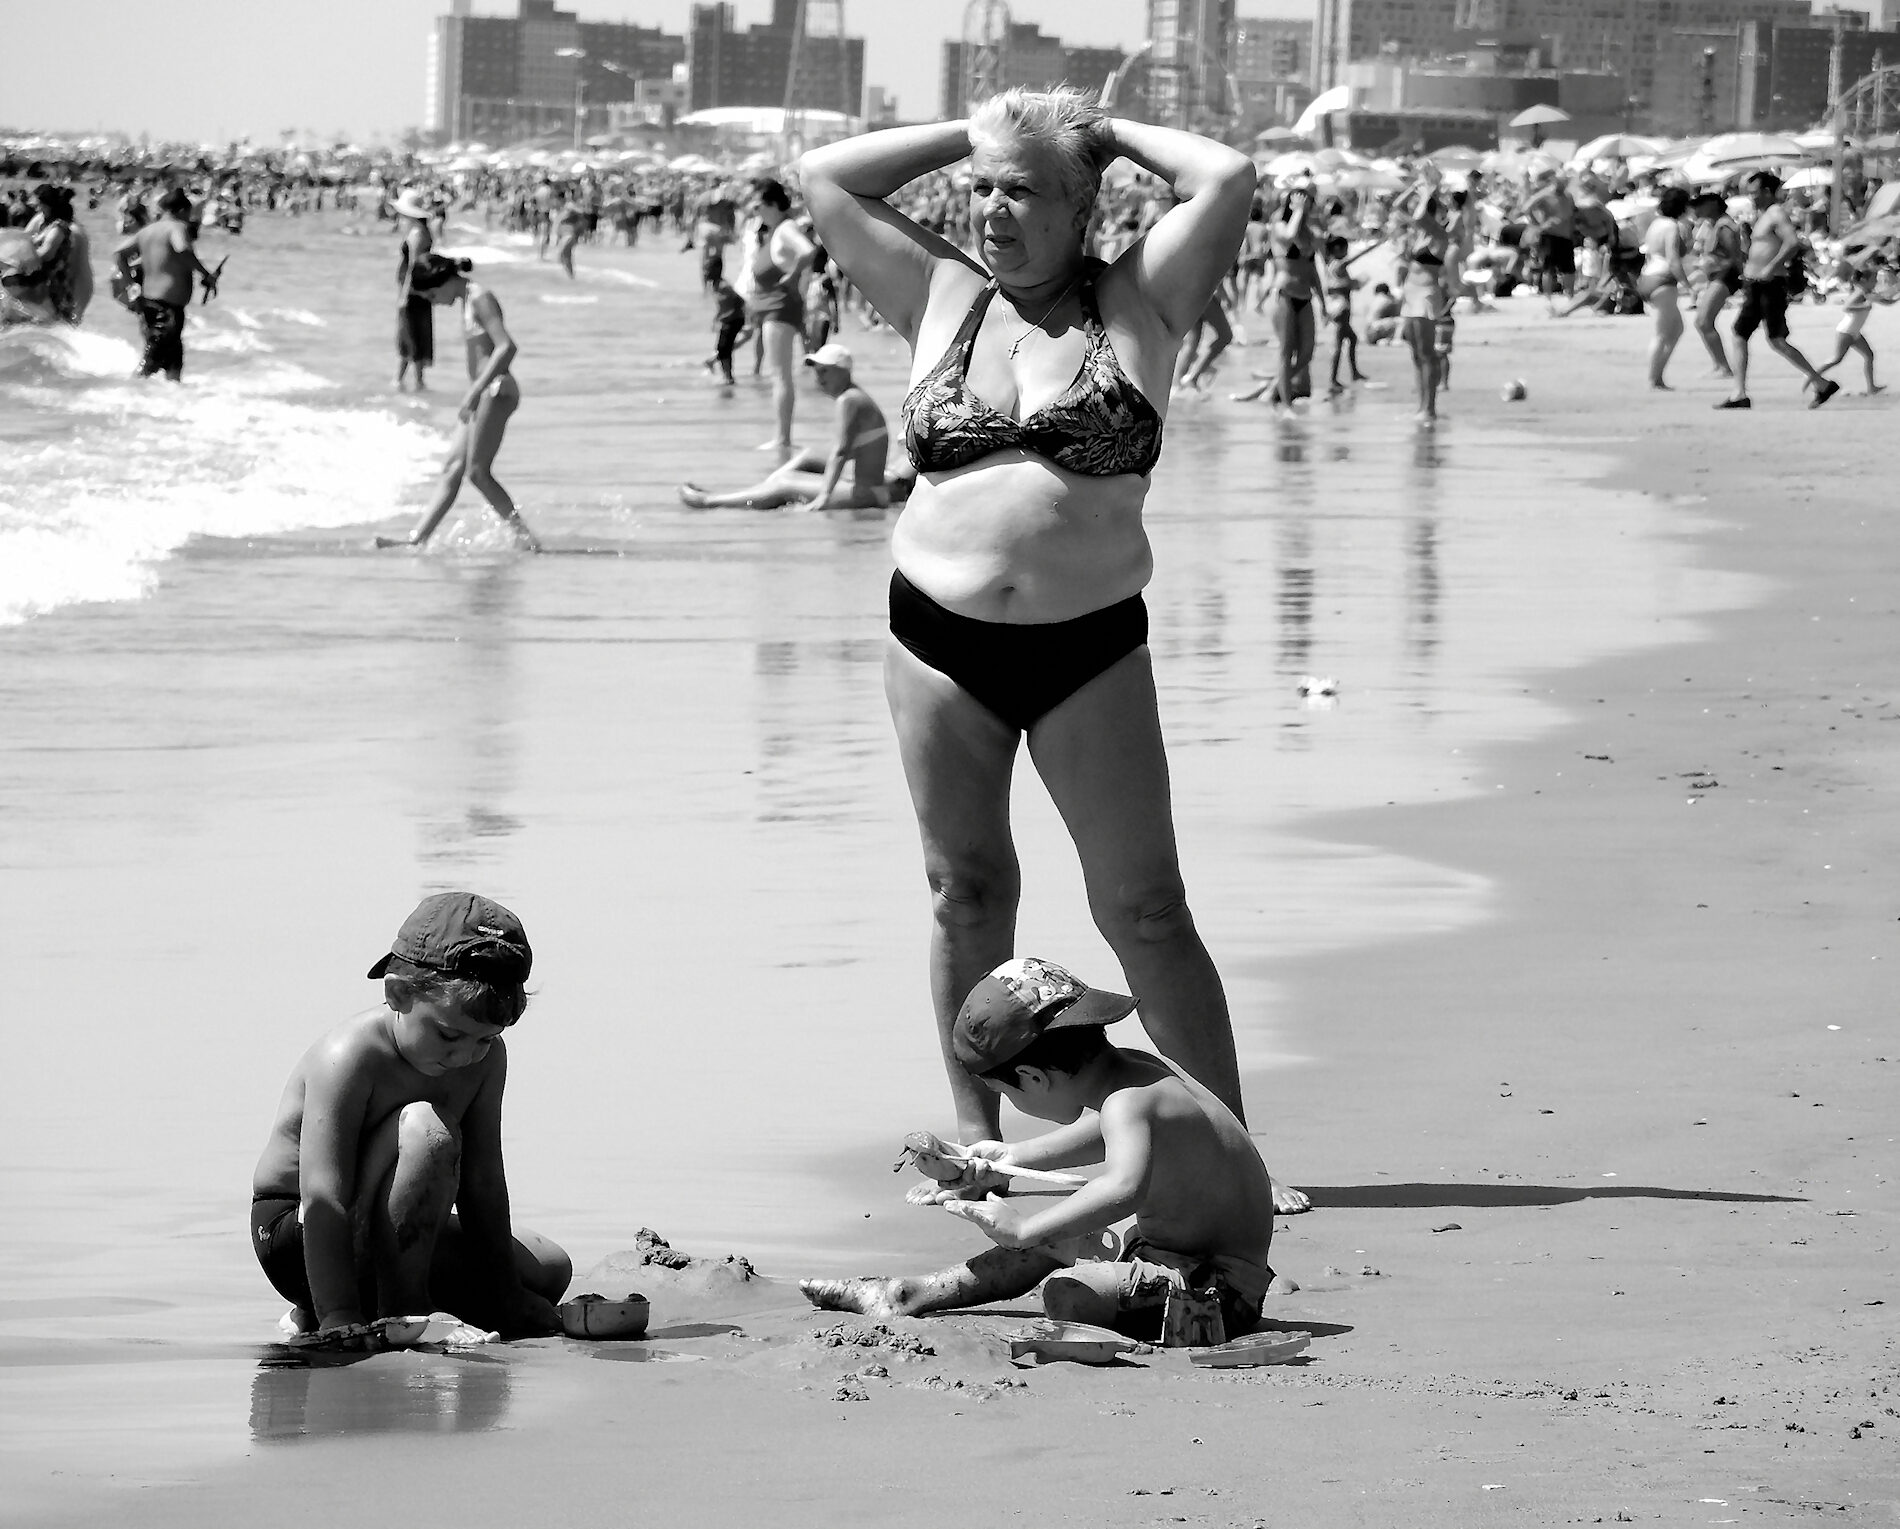 An elderly woman in a bikini standing on a crowded beach with her hands behind her head, two boys with baseball caps playing in the sand at her feet.